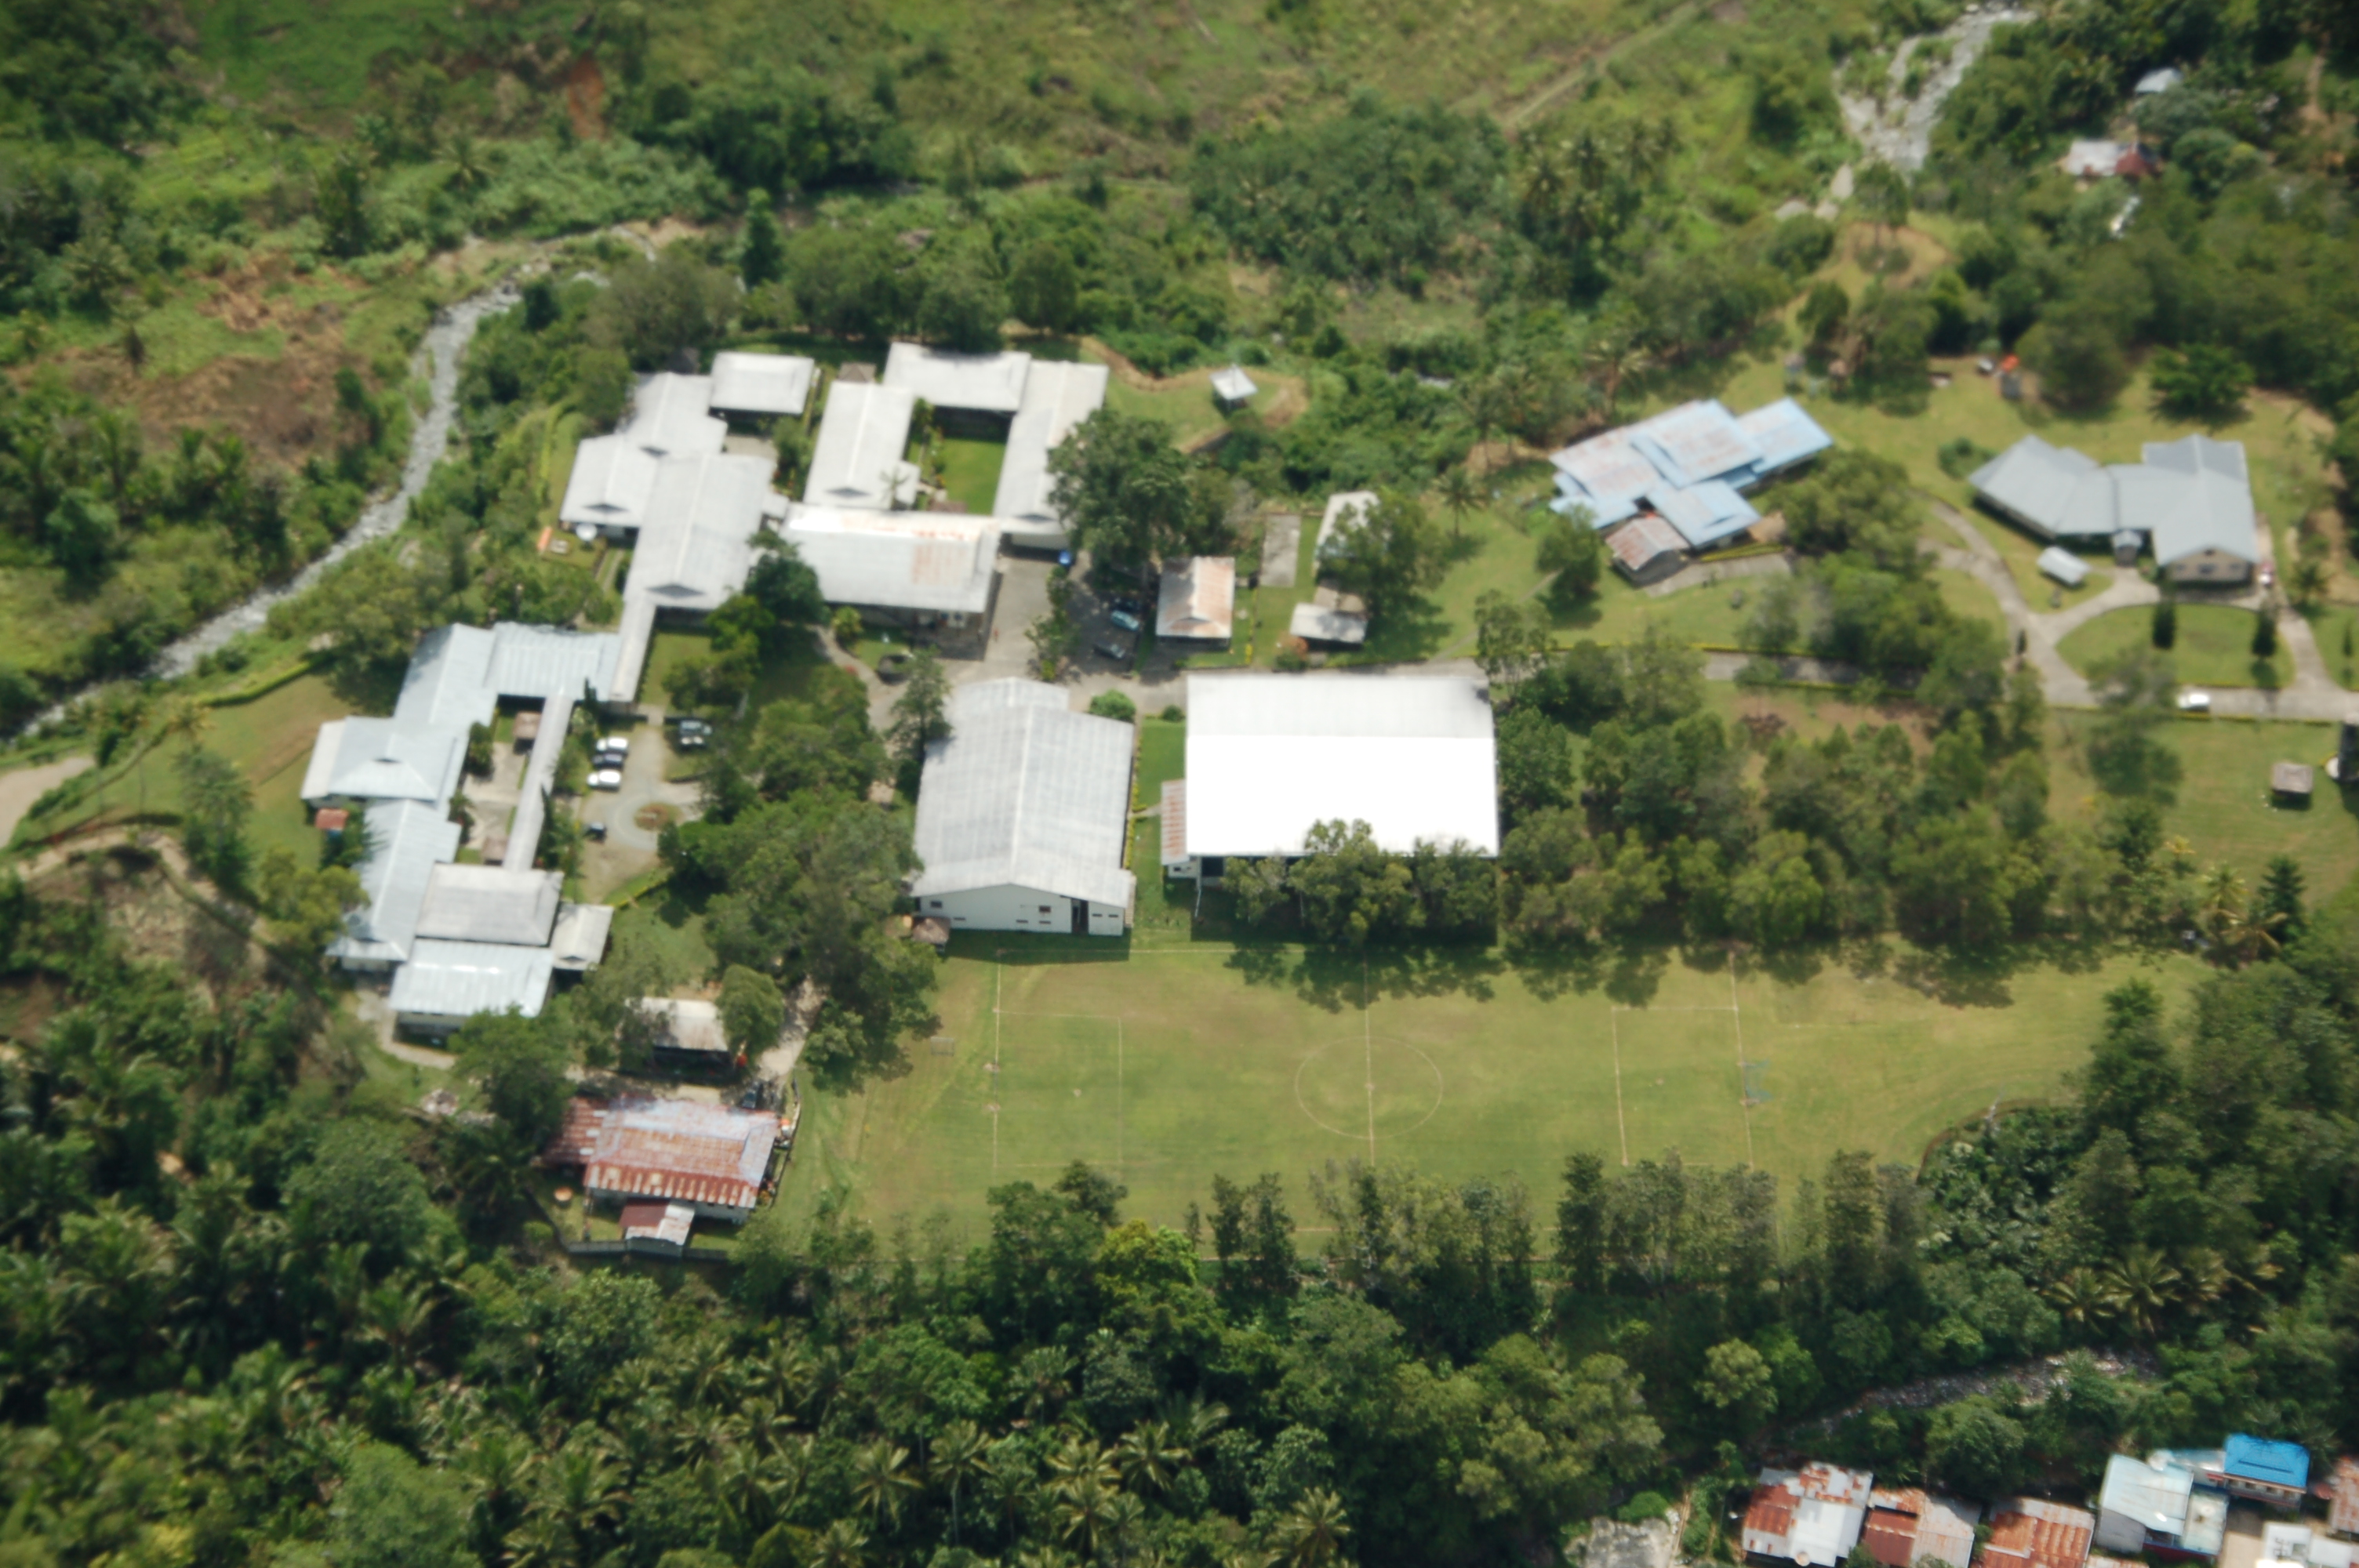 An aerial view of our campus